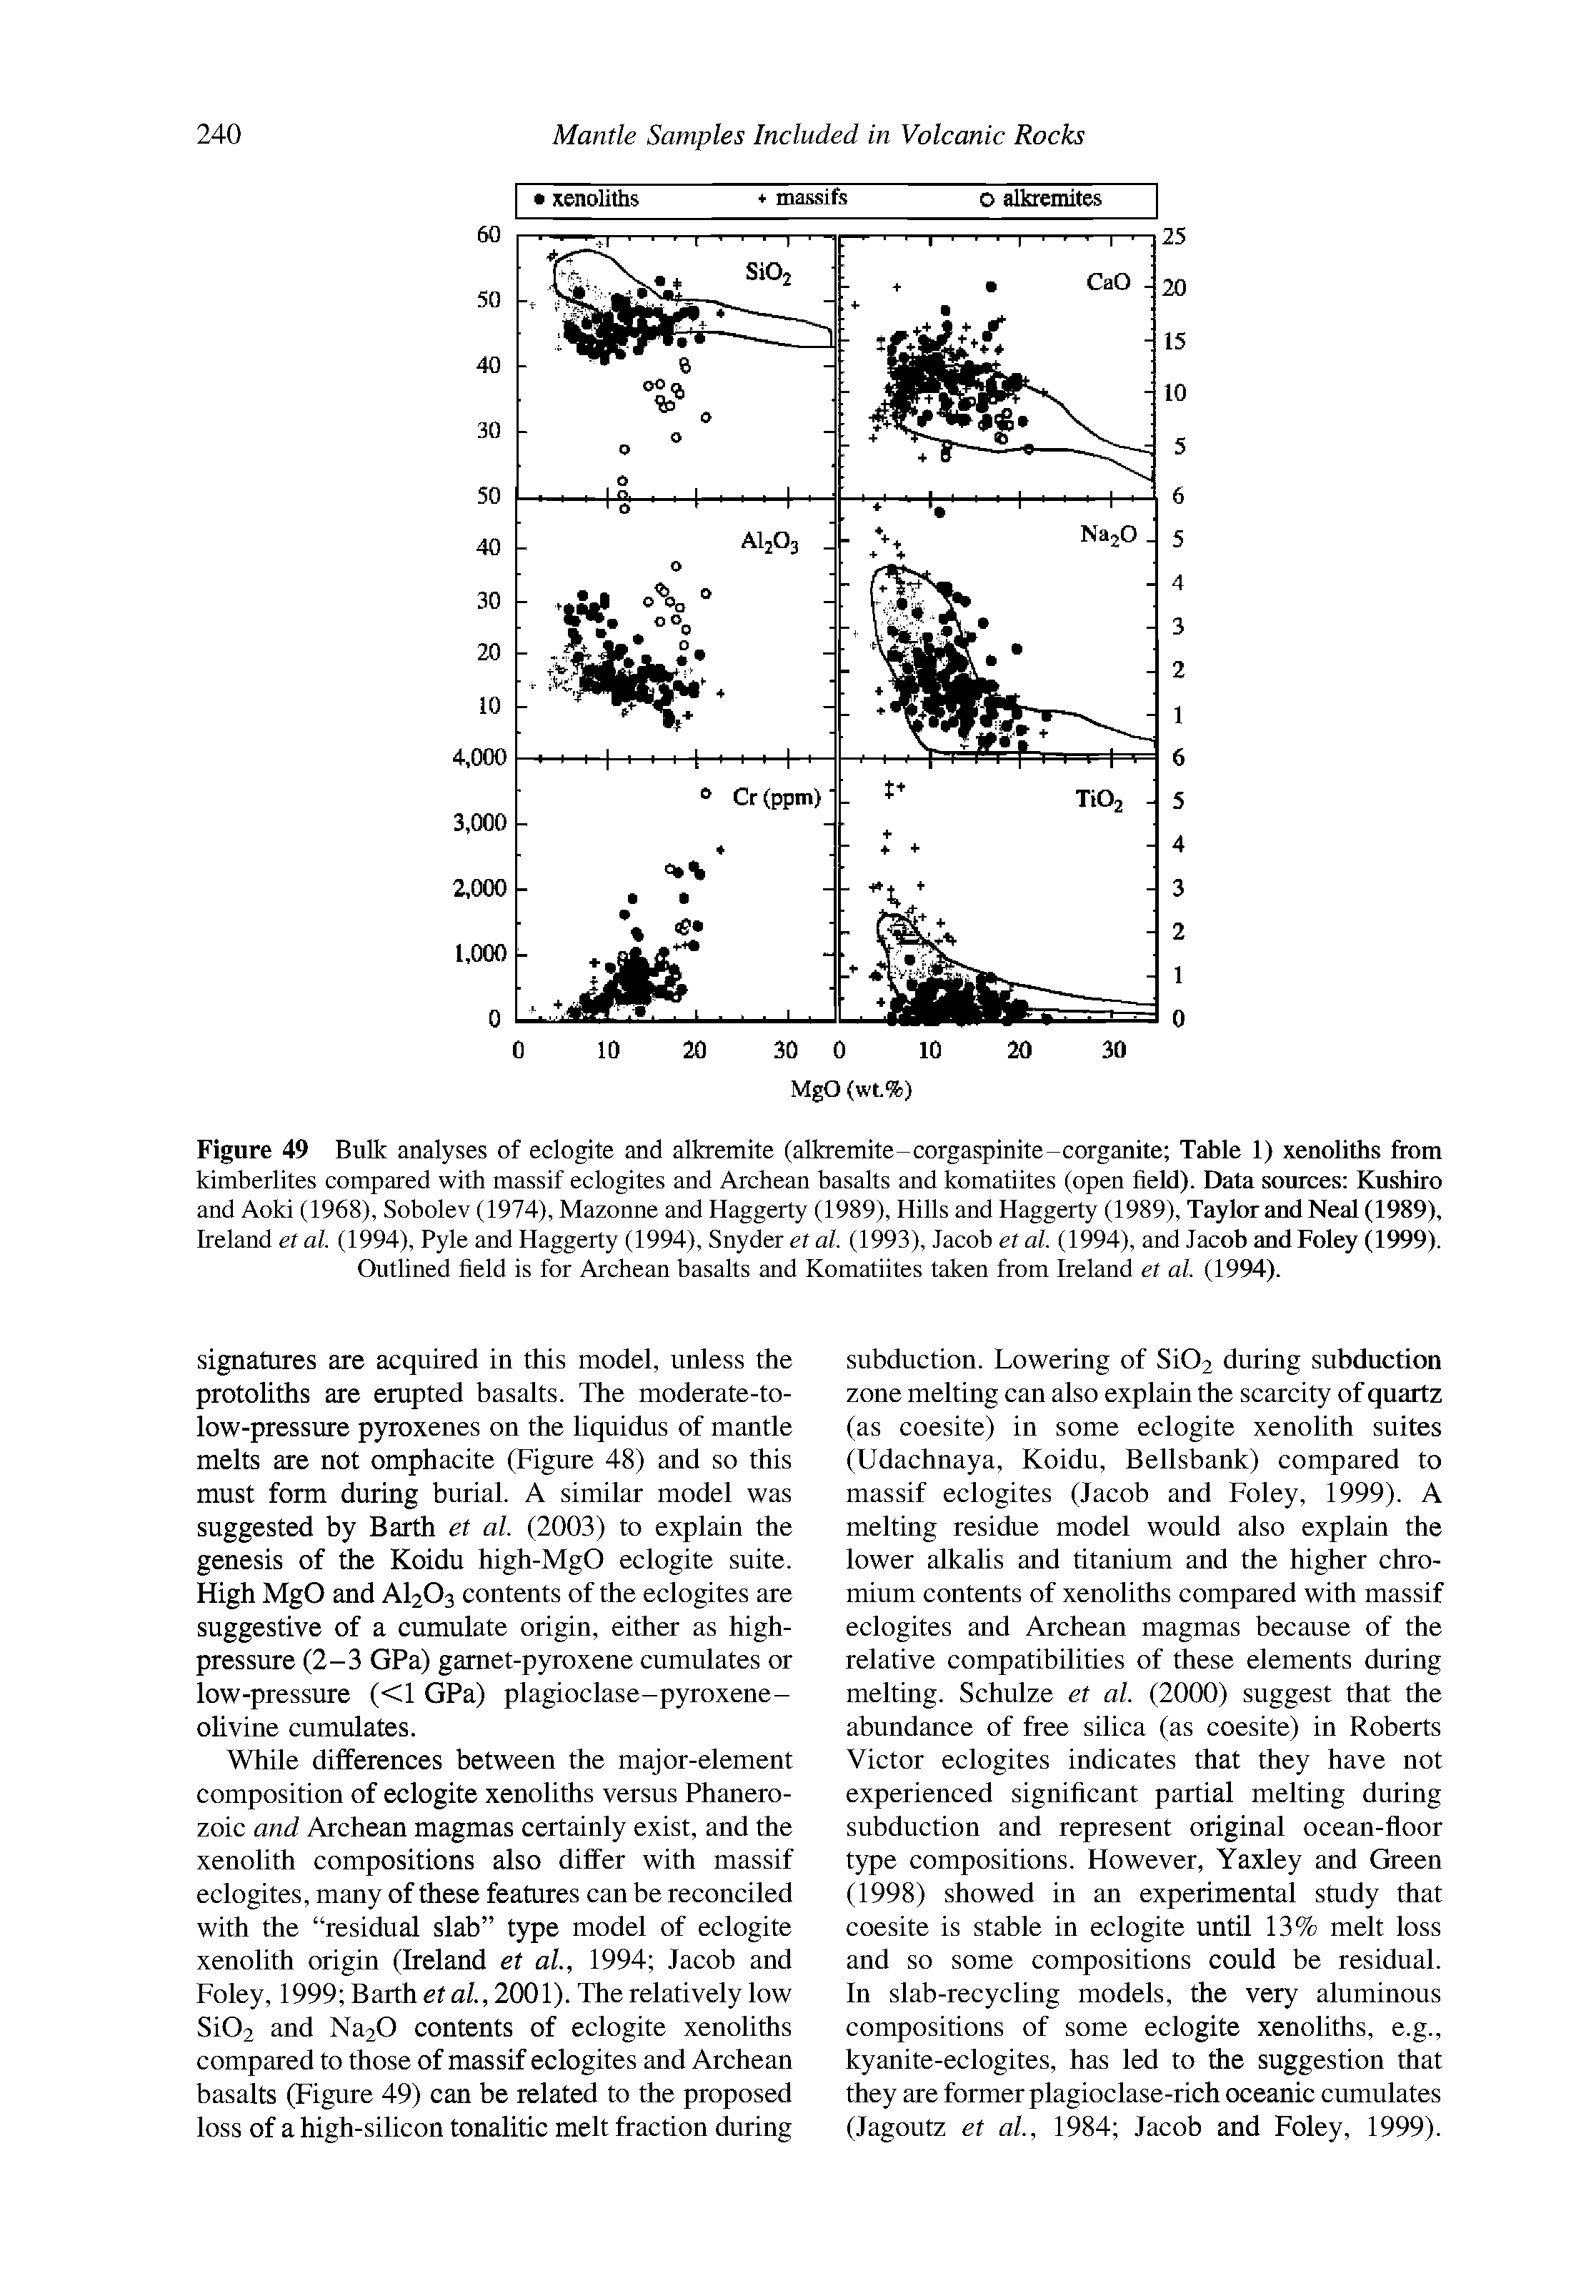 Figure 49 Bulk analyses of eclogite and alkremite (alkremite-corgaspinite-corganite Table 1) xenoliths from kimberlites compared with massif eclogites and Archean basalts and komatiites (open field). Data sources Kushiro and Aoki (1968), Sobolev (1974), Mazonne and Haggerty (1989), Hills and Haggerty (1989), Taylor and Neal (1989), Ireland et al. (1994), Pyle and Haggerty (1994), Snyder et al. (1993), Jacob et al. (1994), and Jacob and Foley (1999). Outlined field is for Archean basalts and Komatiites taken from Ireland et al. (1994).